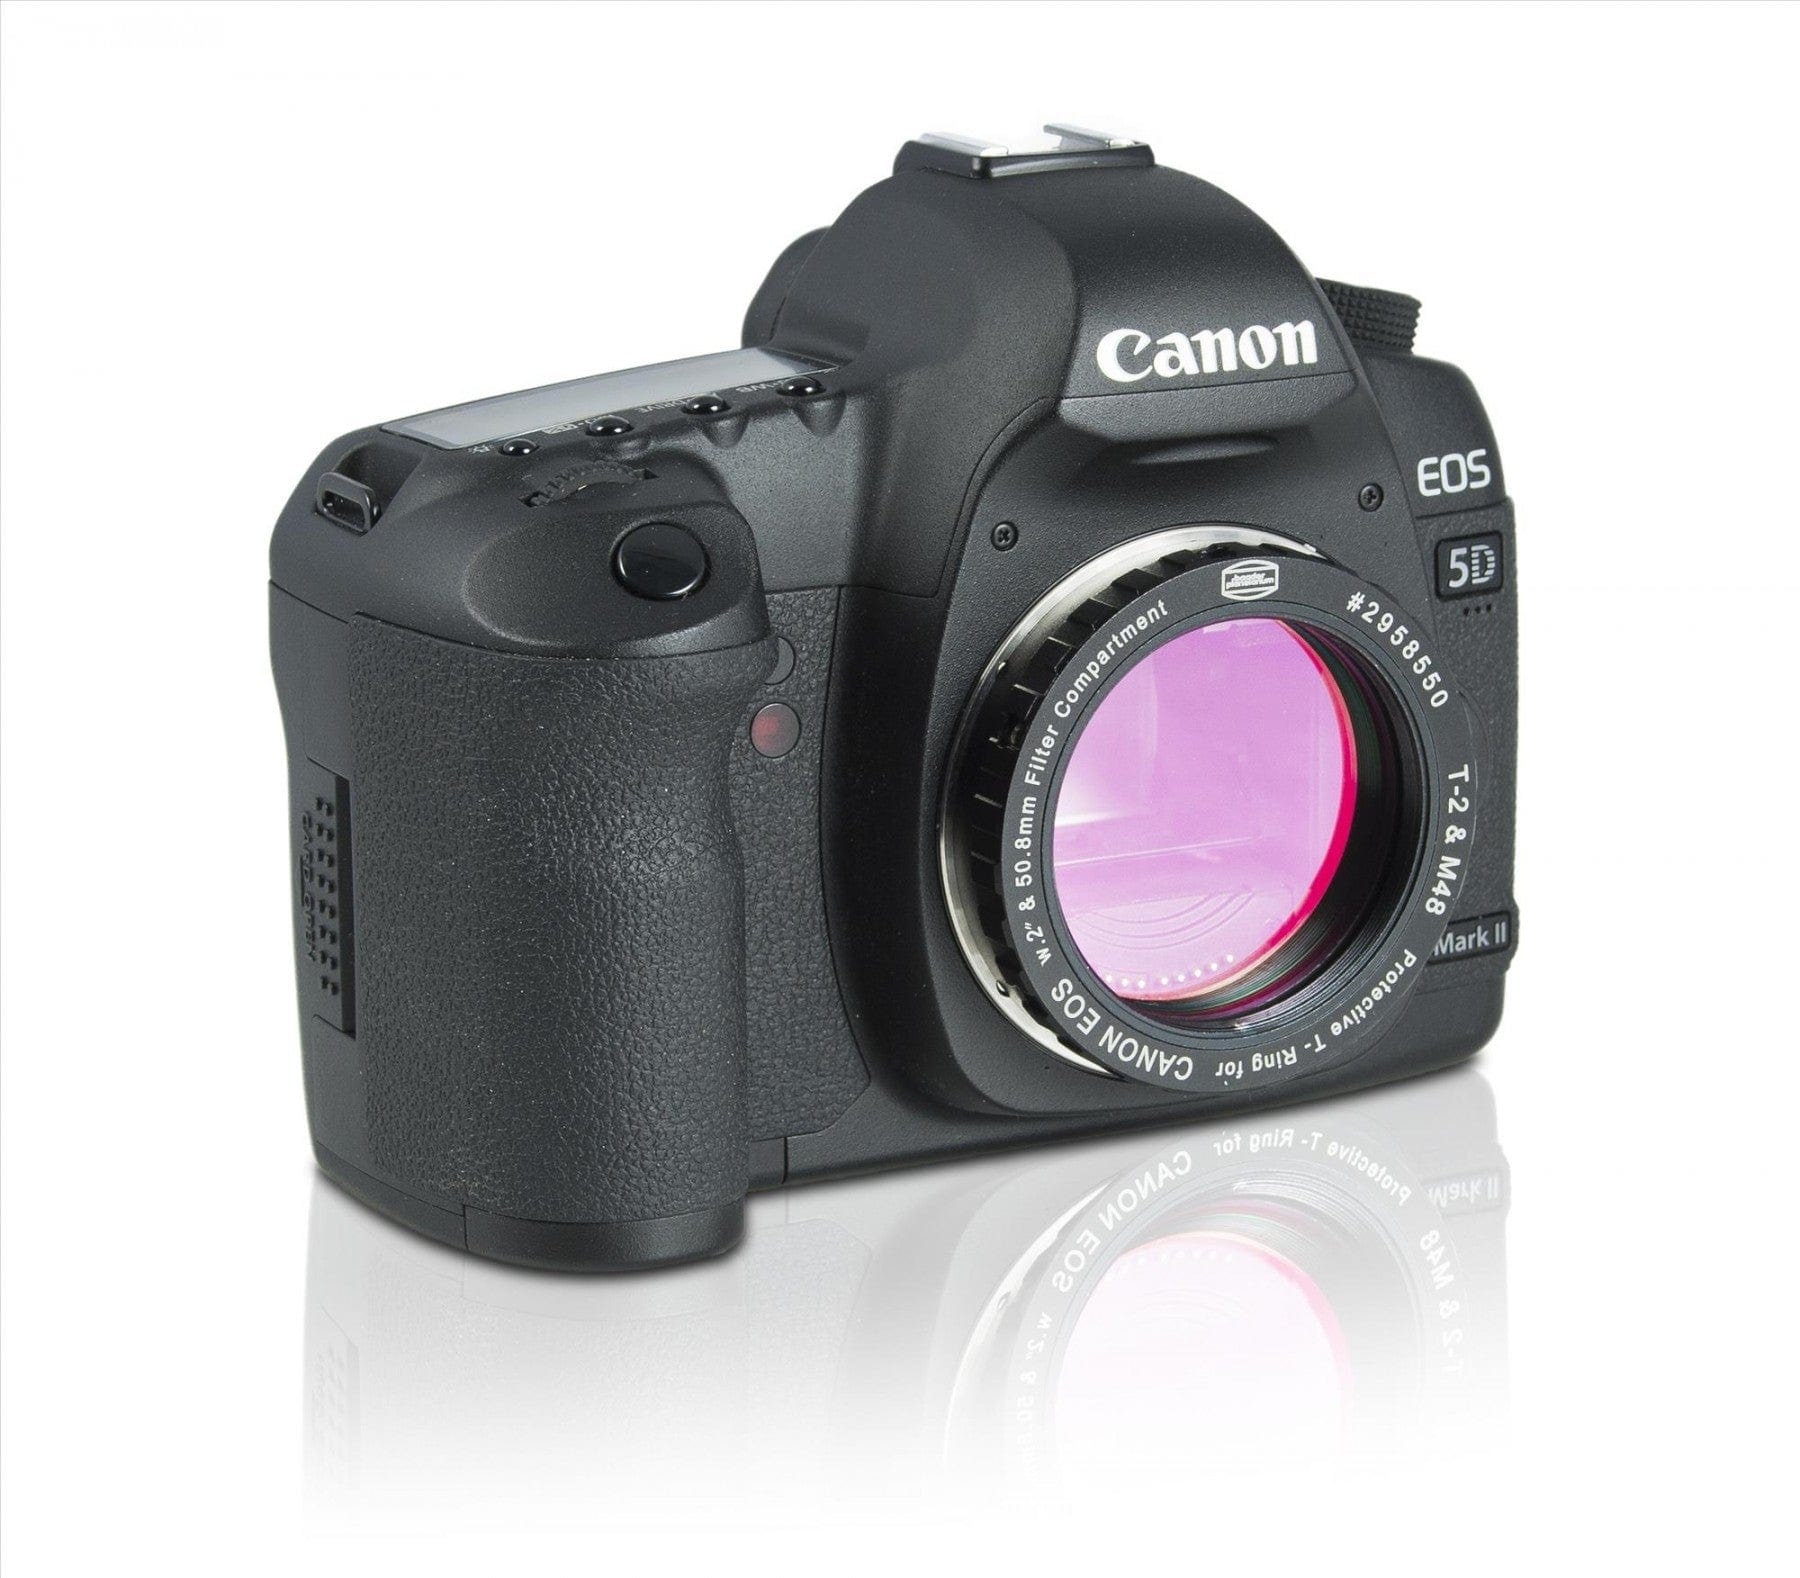 Baader Zero-Tolerance Protective Canon DSLR T-Ring T-2/M48 and 2